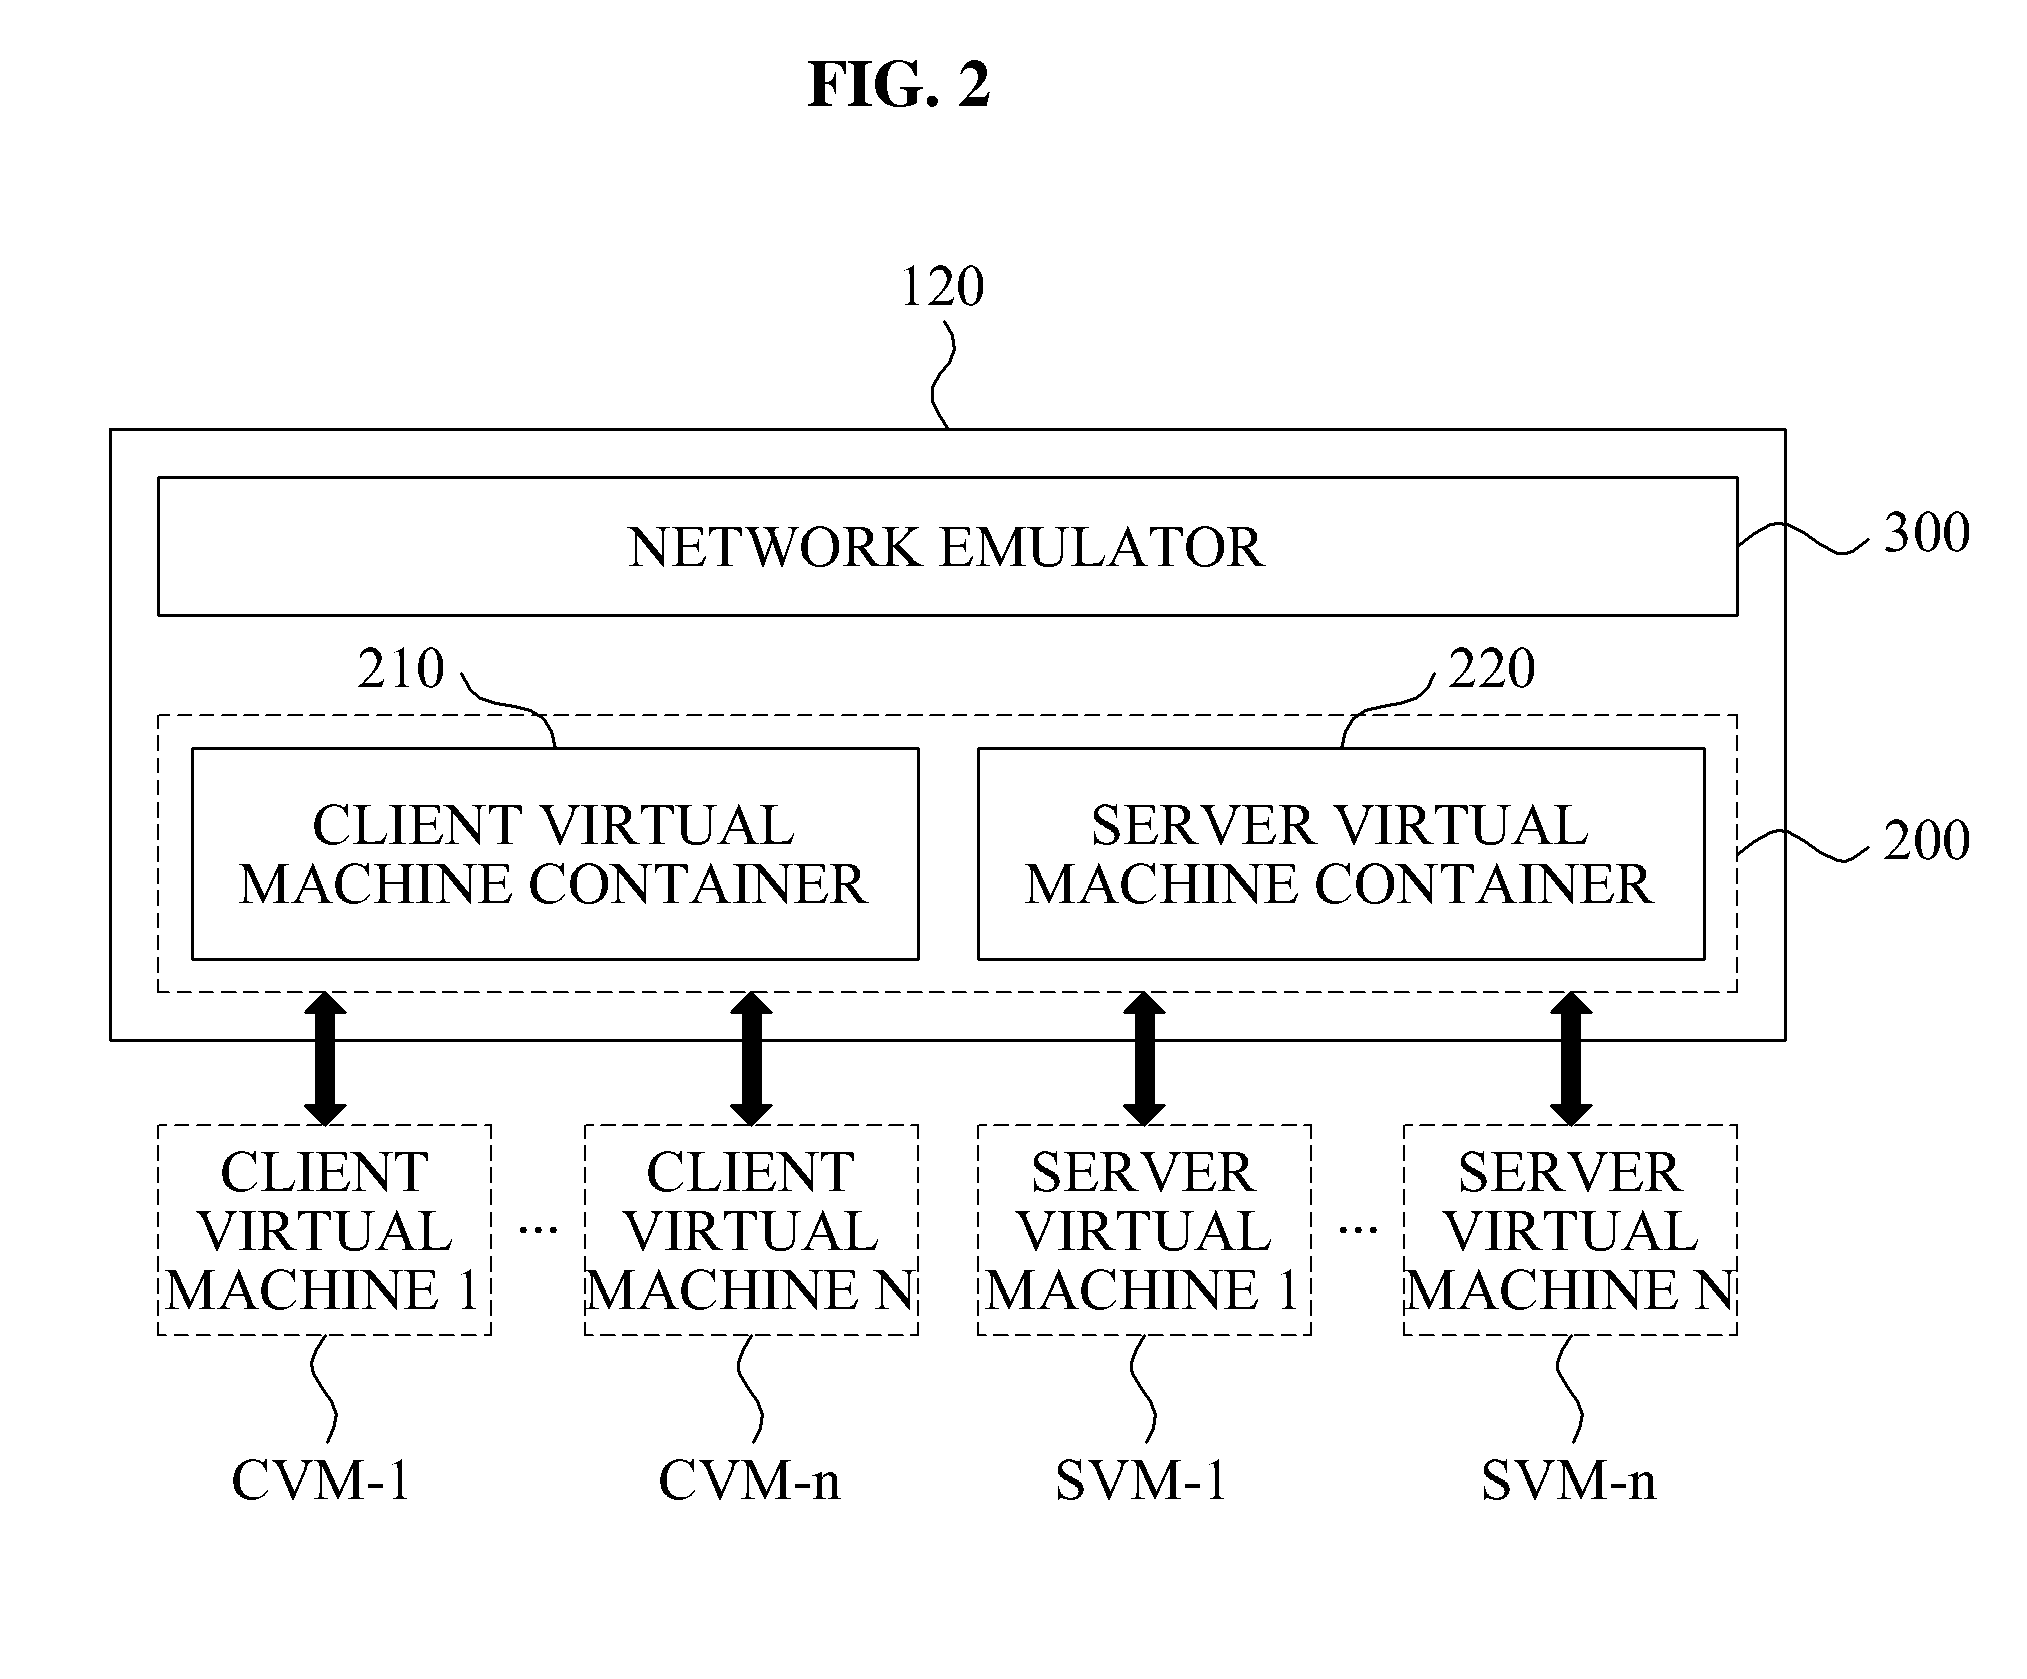 System and method for production of multiuser network game